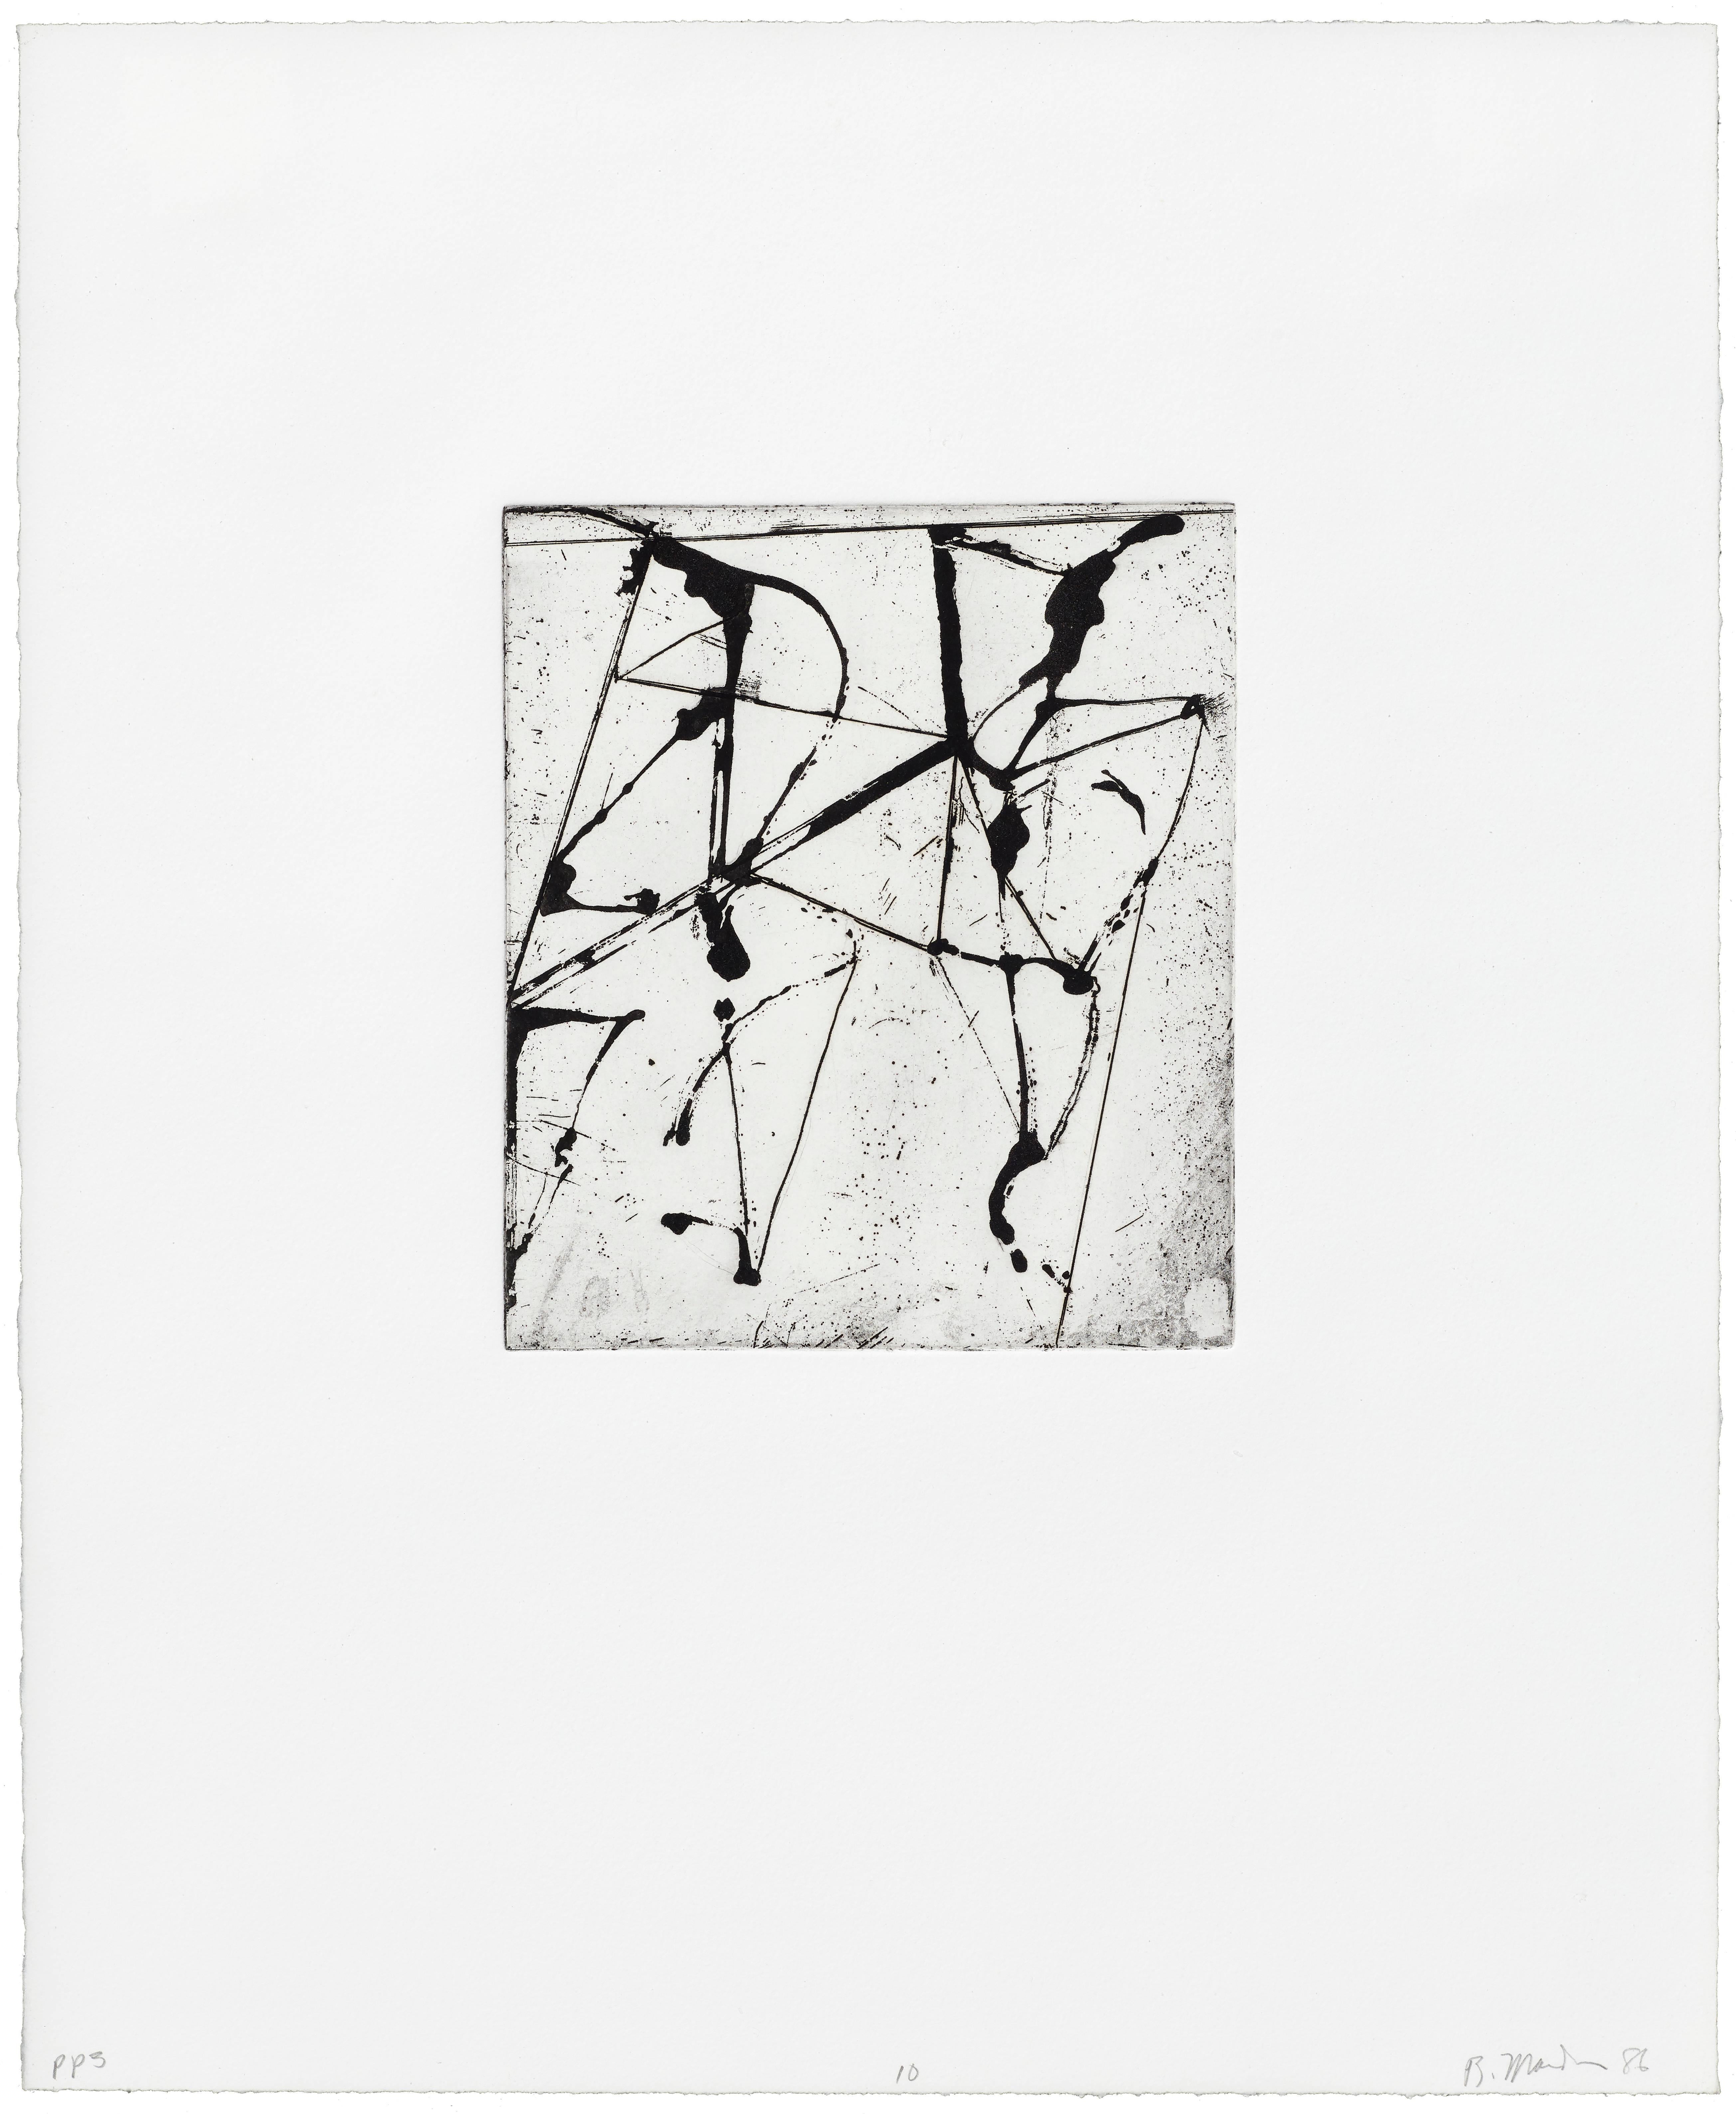 Etchings to Rexroth #10 - Print by Brice Marden